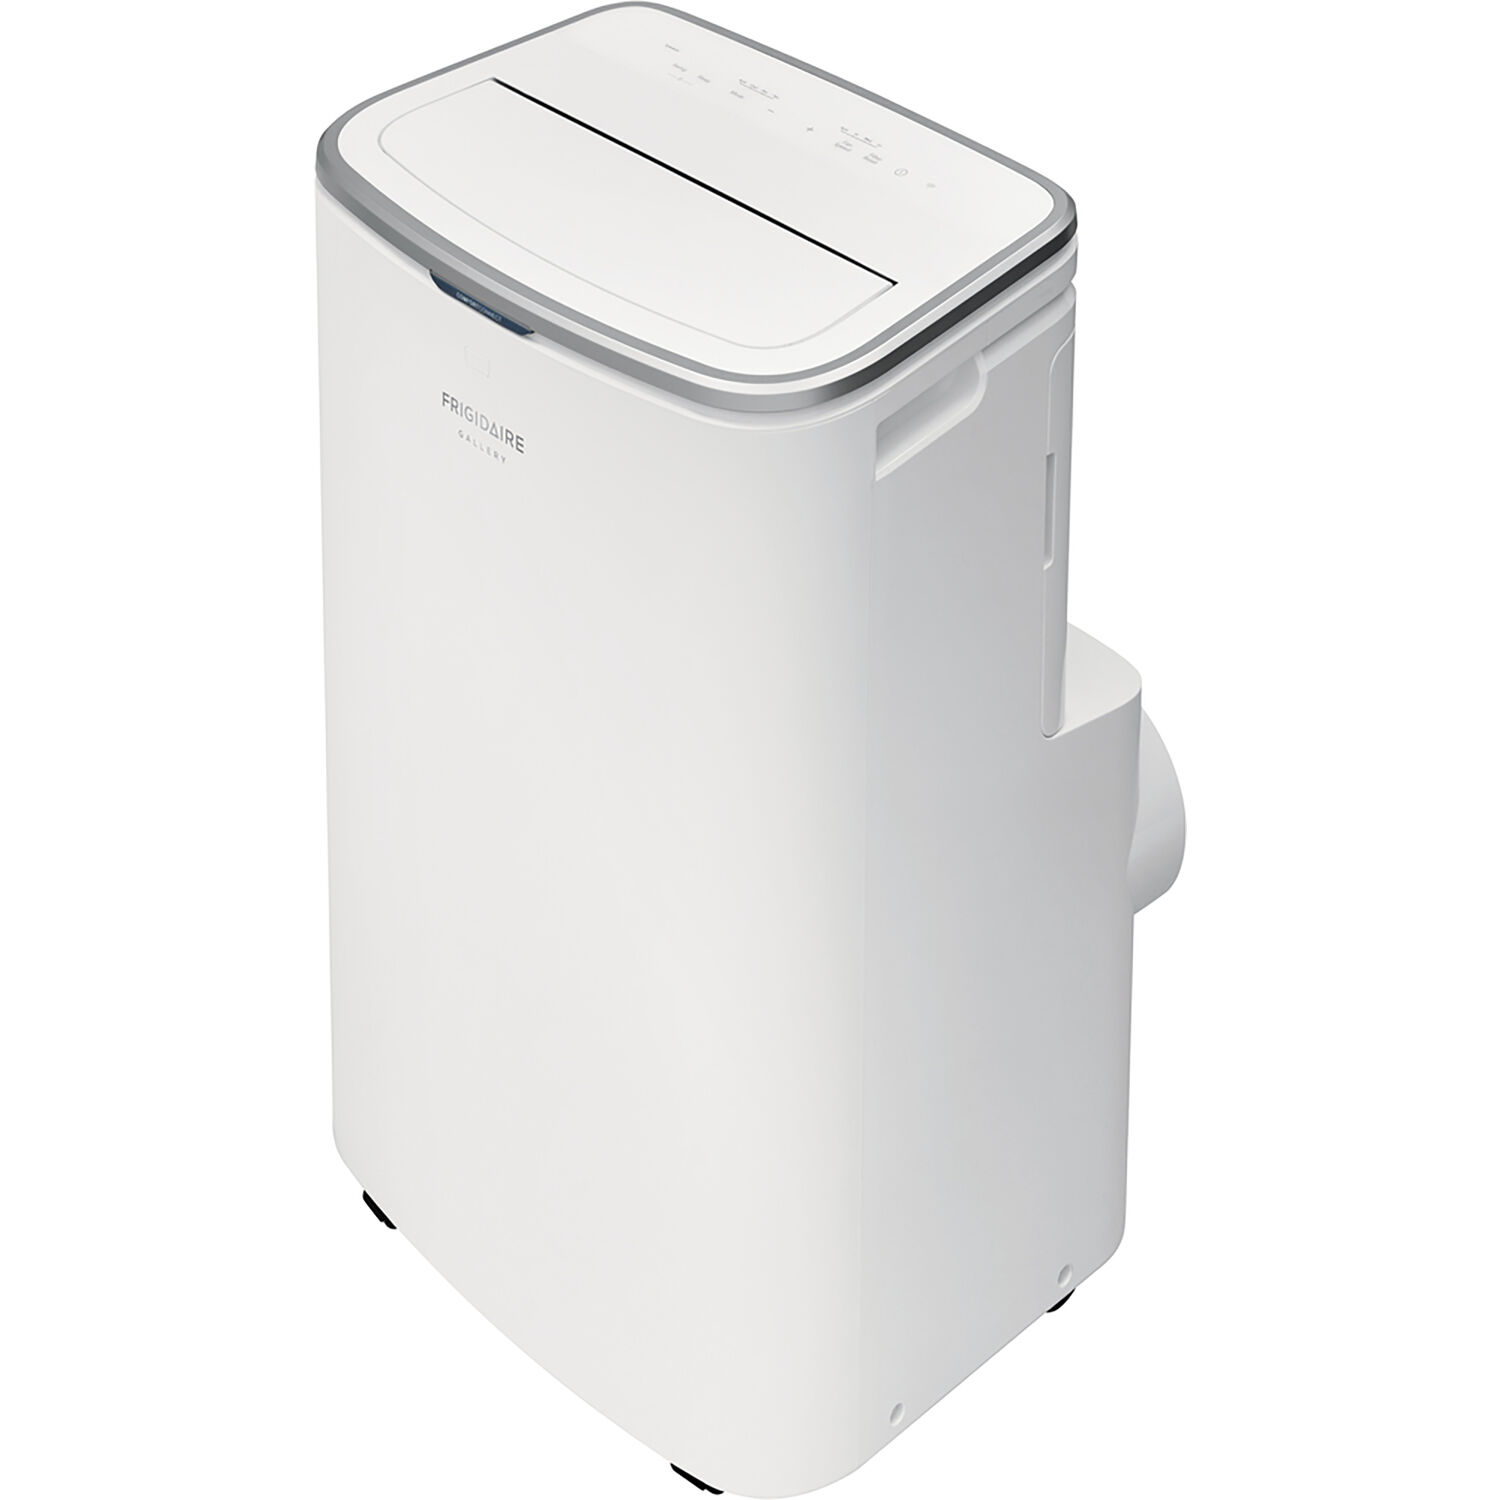 Frigidaire Cool Connect Smart Portable Air Conditioner with Wi-Fi Control for a Room up to 600-Sq. Ft. - image 13 of 14